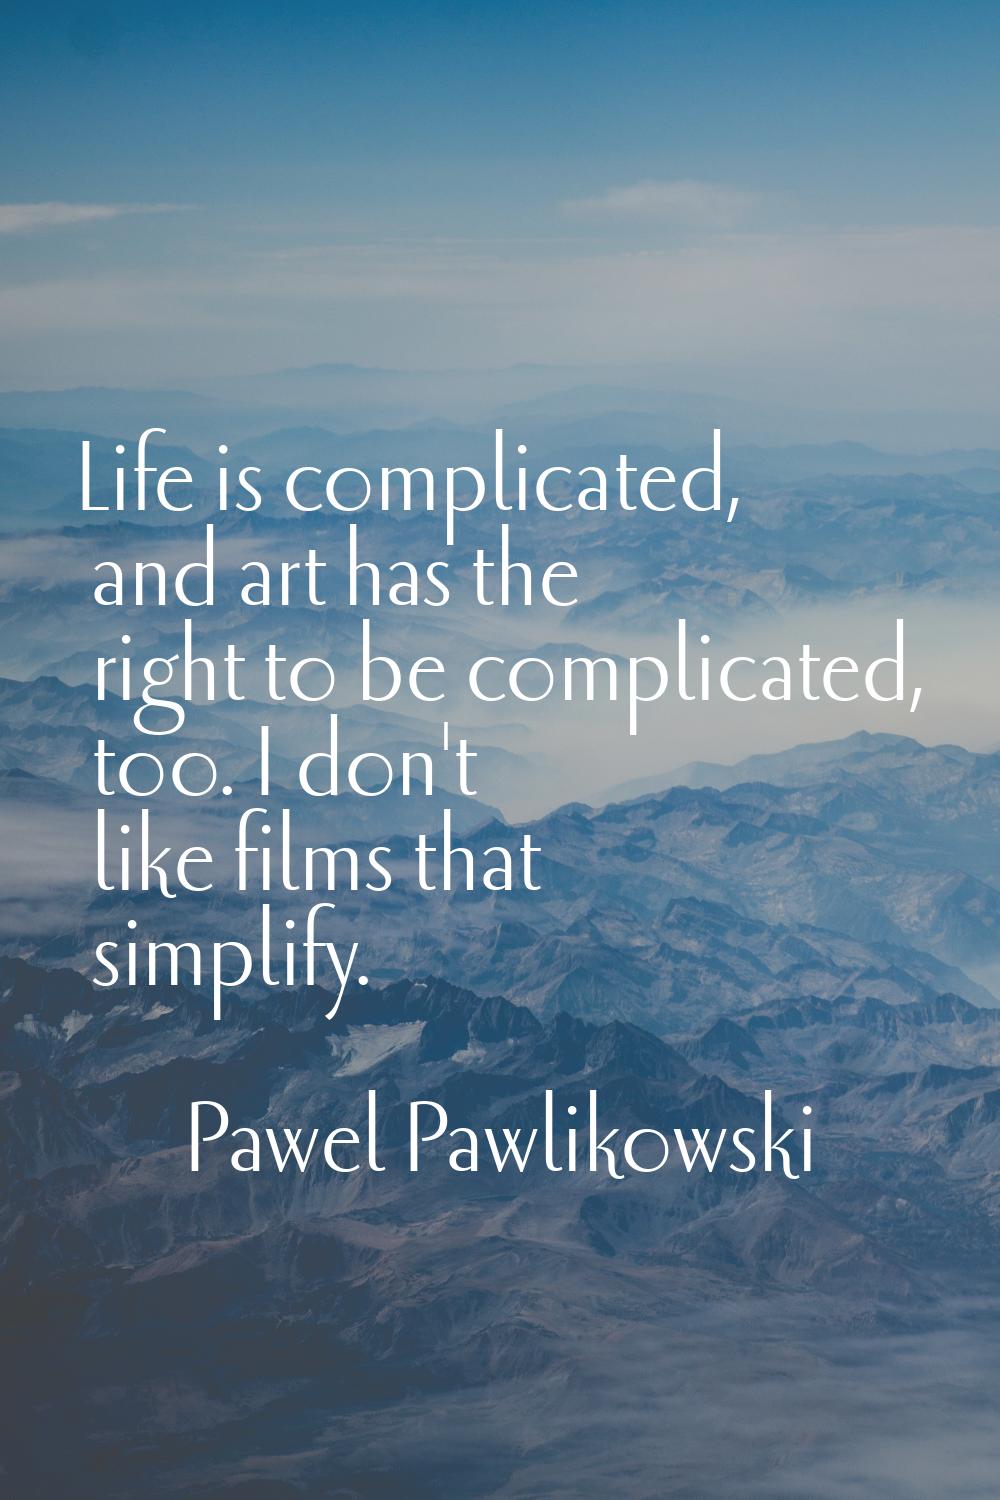 Life is complicated, and art has the right to be complicated, too. I don't like films that simplify